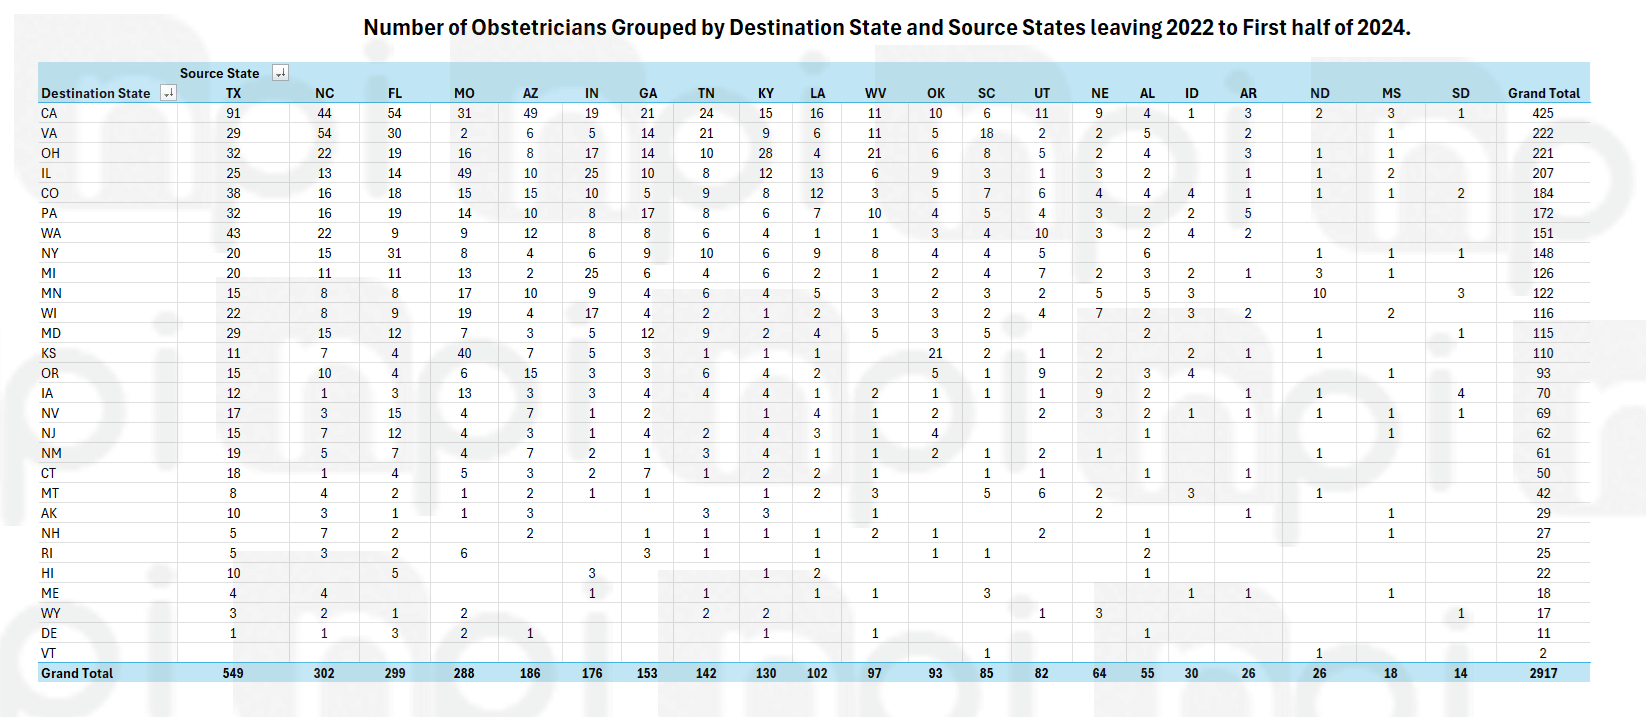 Table showing the migration data for OB-GYNs who have left states with restrictive reproductive health laws from 2022 to the first half of 2024, grouped by destination state and source state